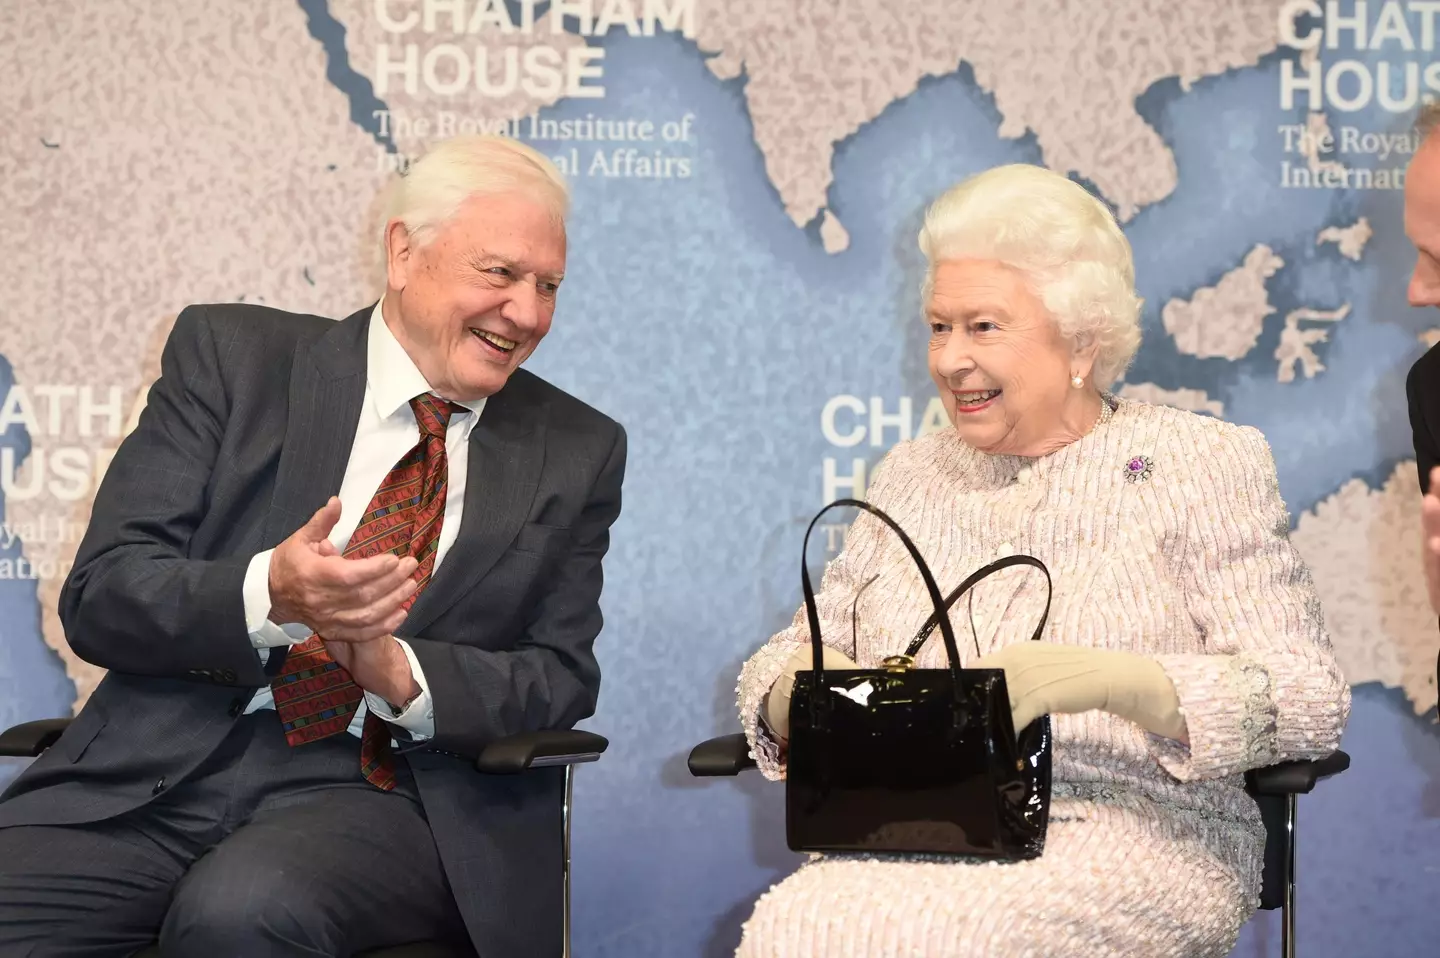 It seemed the Queen had a very humorous relationship with Sir David Attenborough.